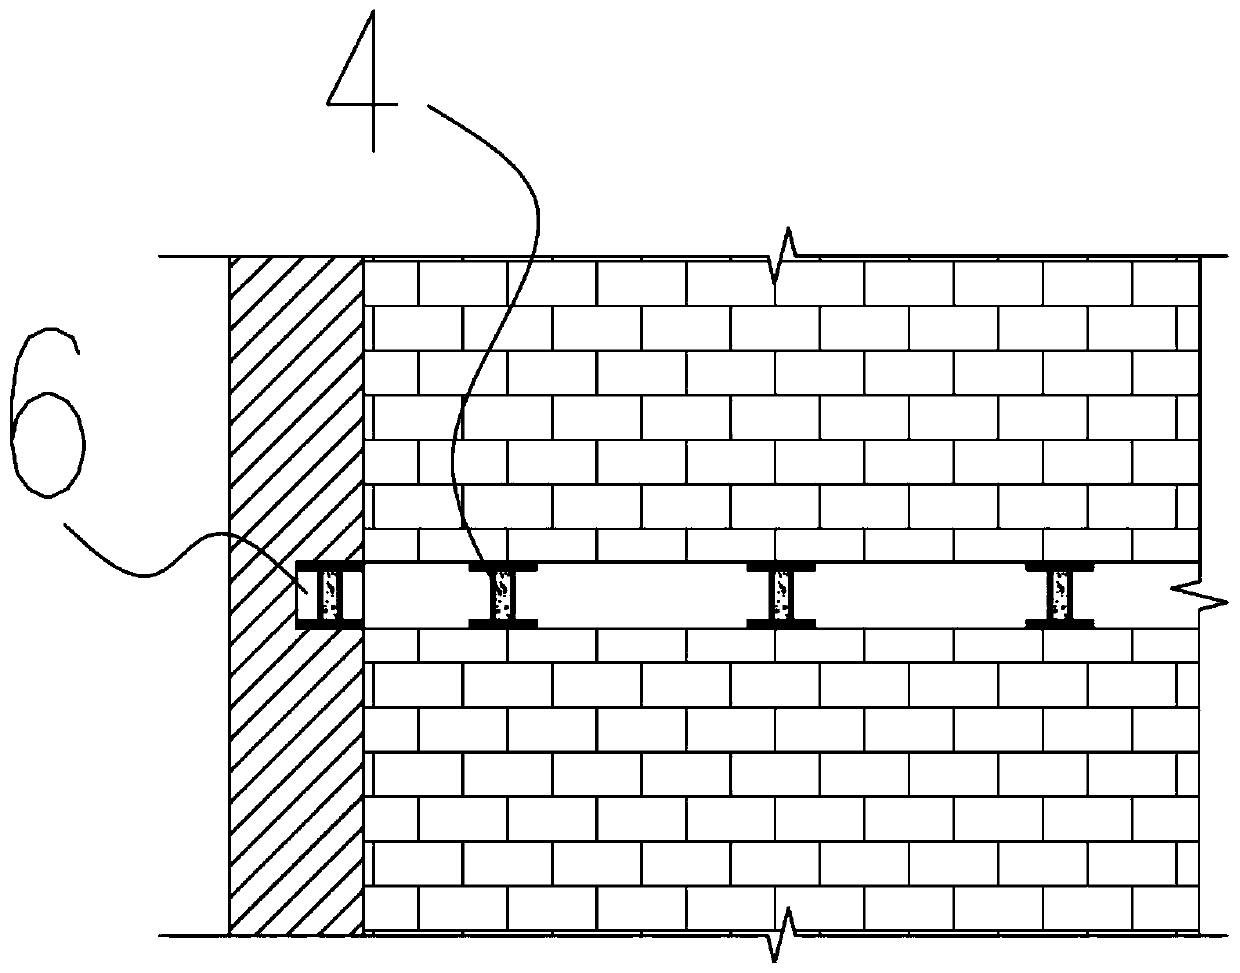 Construction method for changing hollow floors into cast-in-situ floors under support